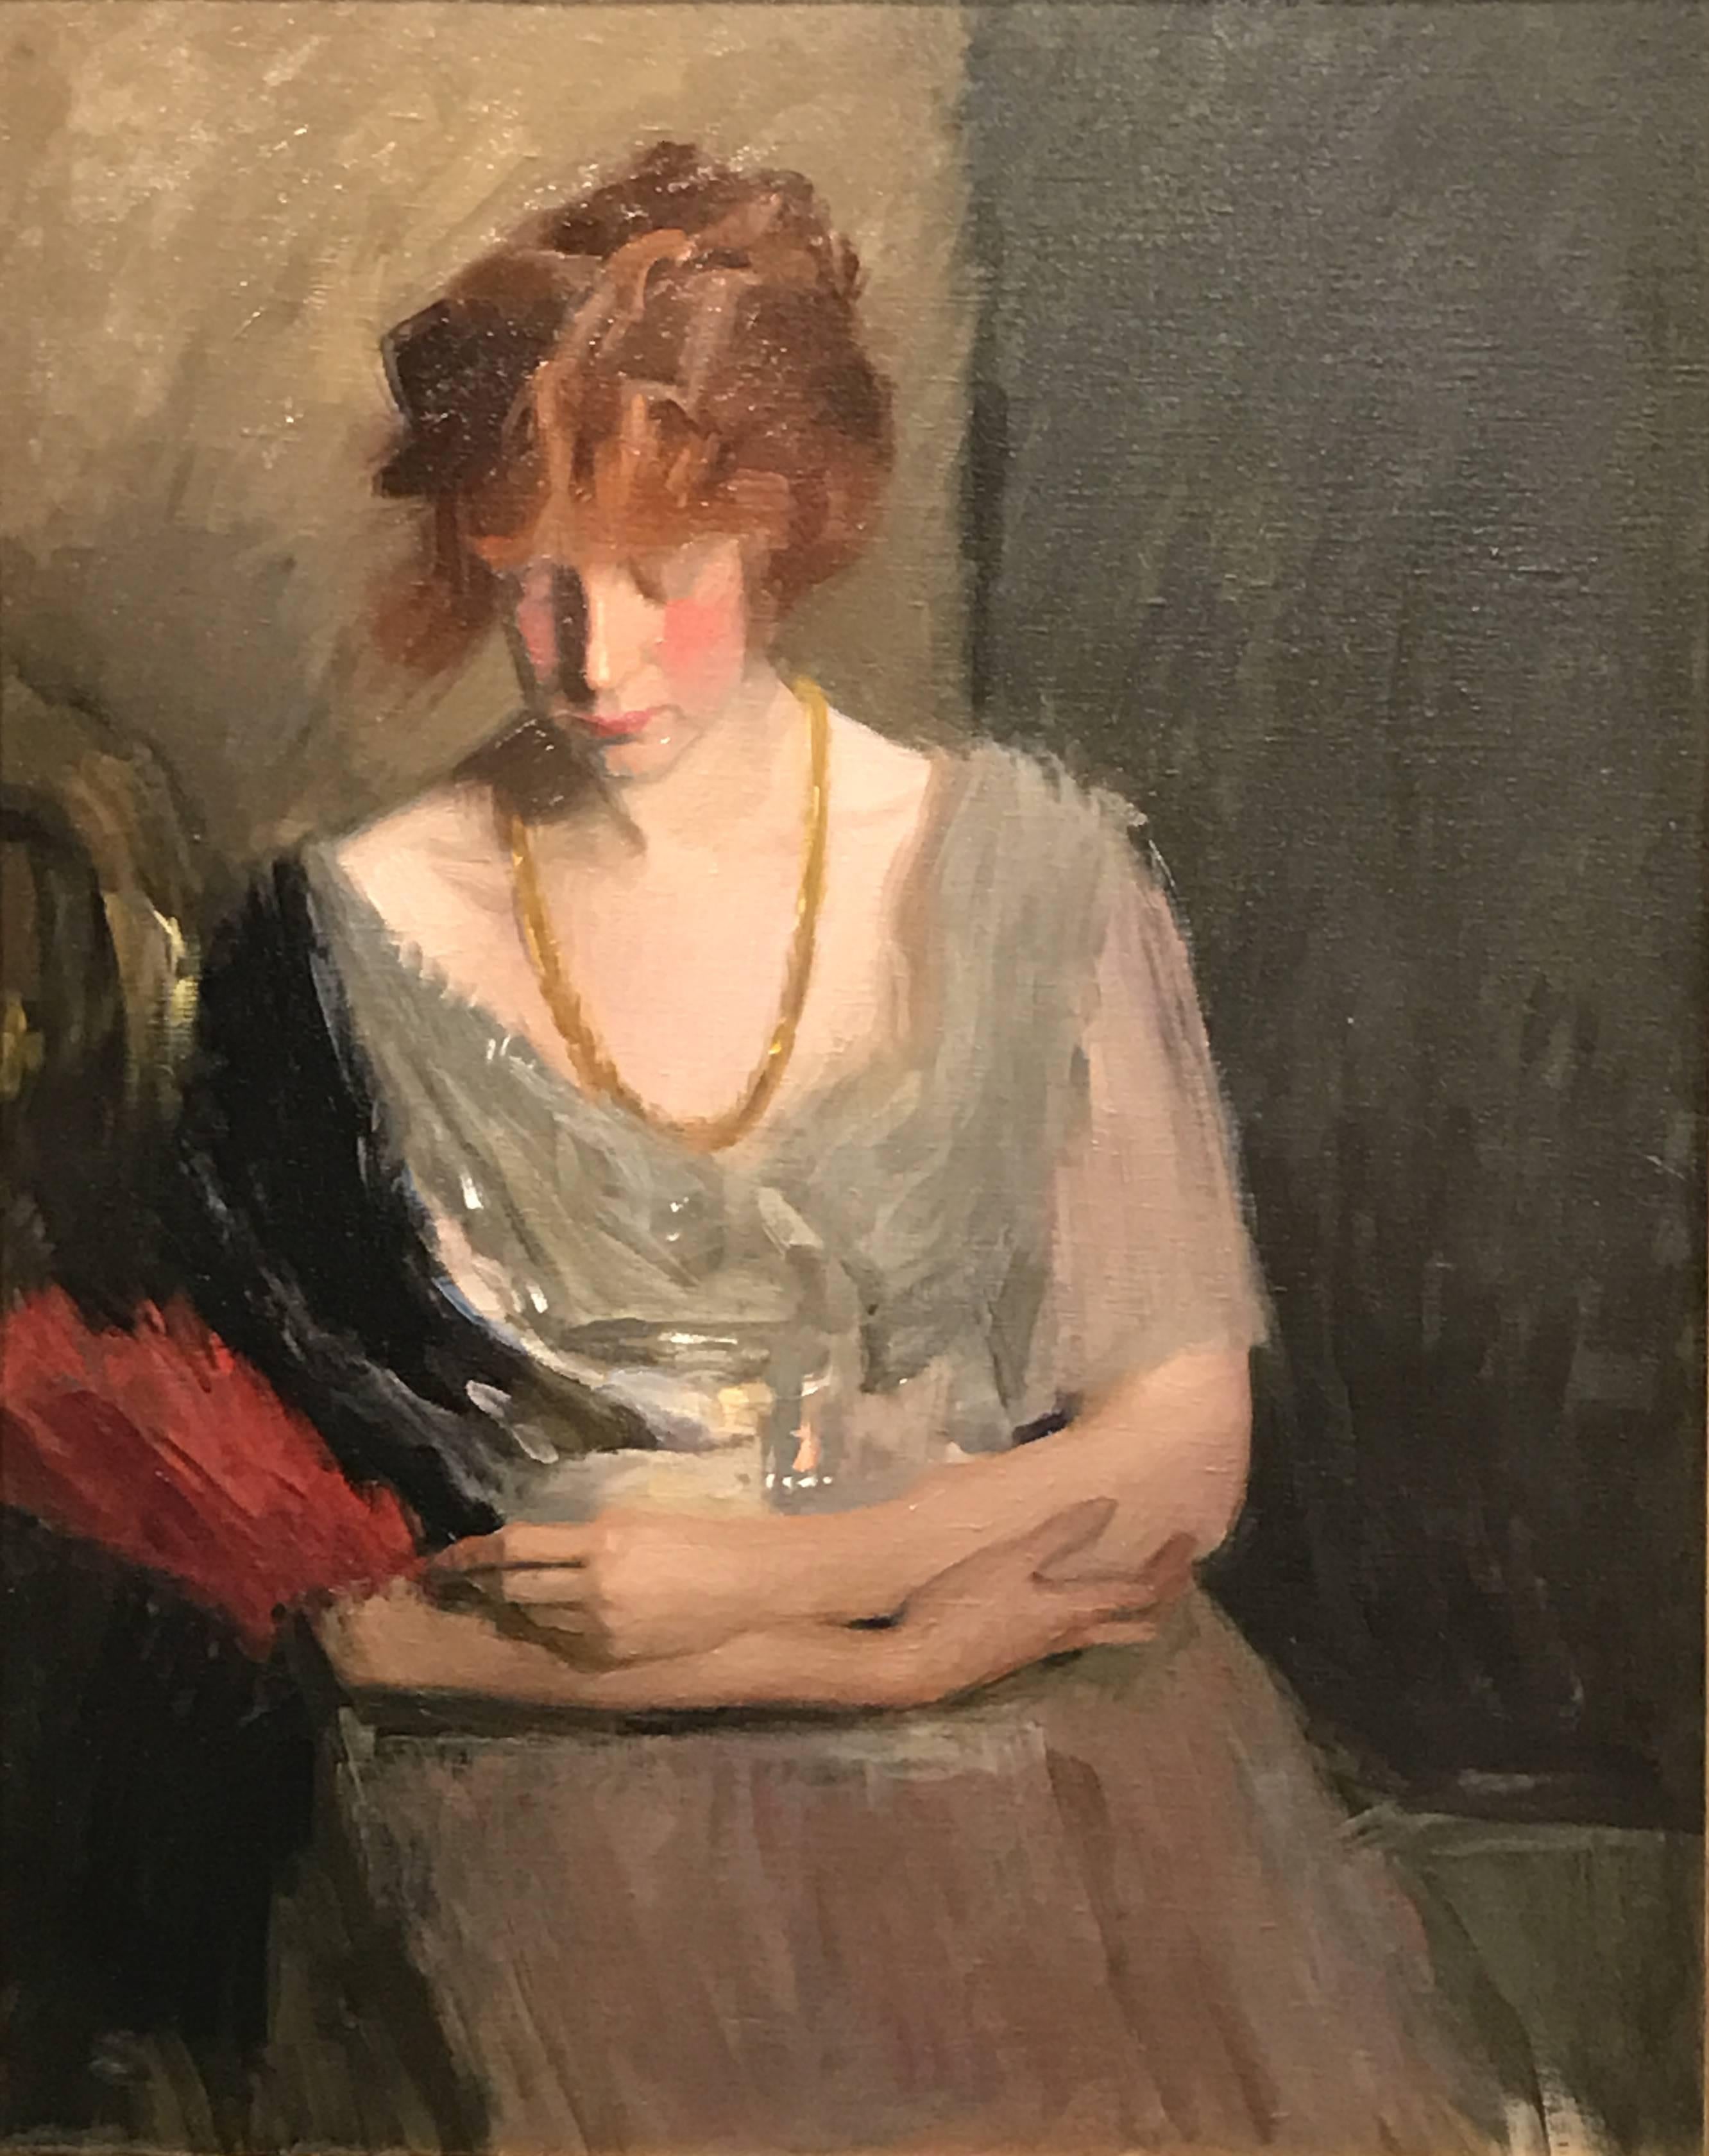 A fine portrait of a red haired model with her hands crossed on her lap was painted by American artist Louise Williams Jackson (1872-1939). Born in Newton, Massachusetts in 1872. She and her family moved to Minnesota when she was young, for several